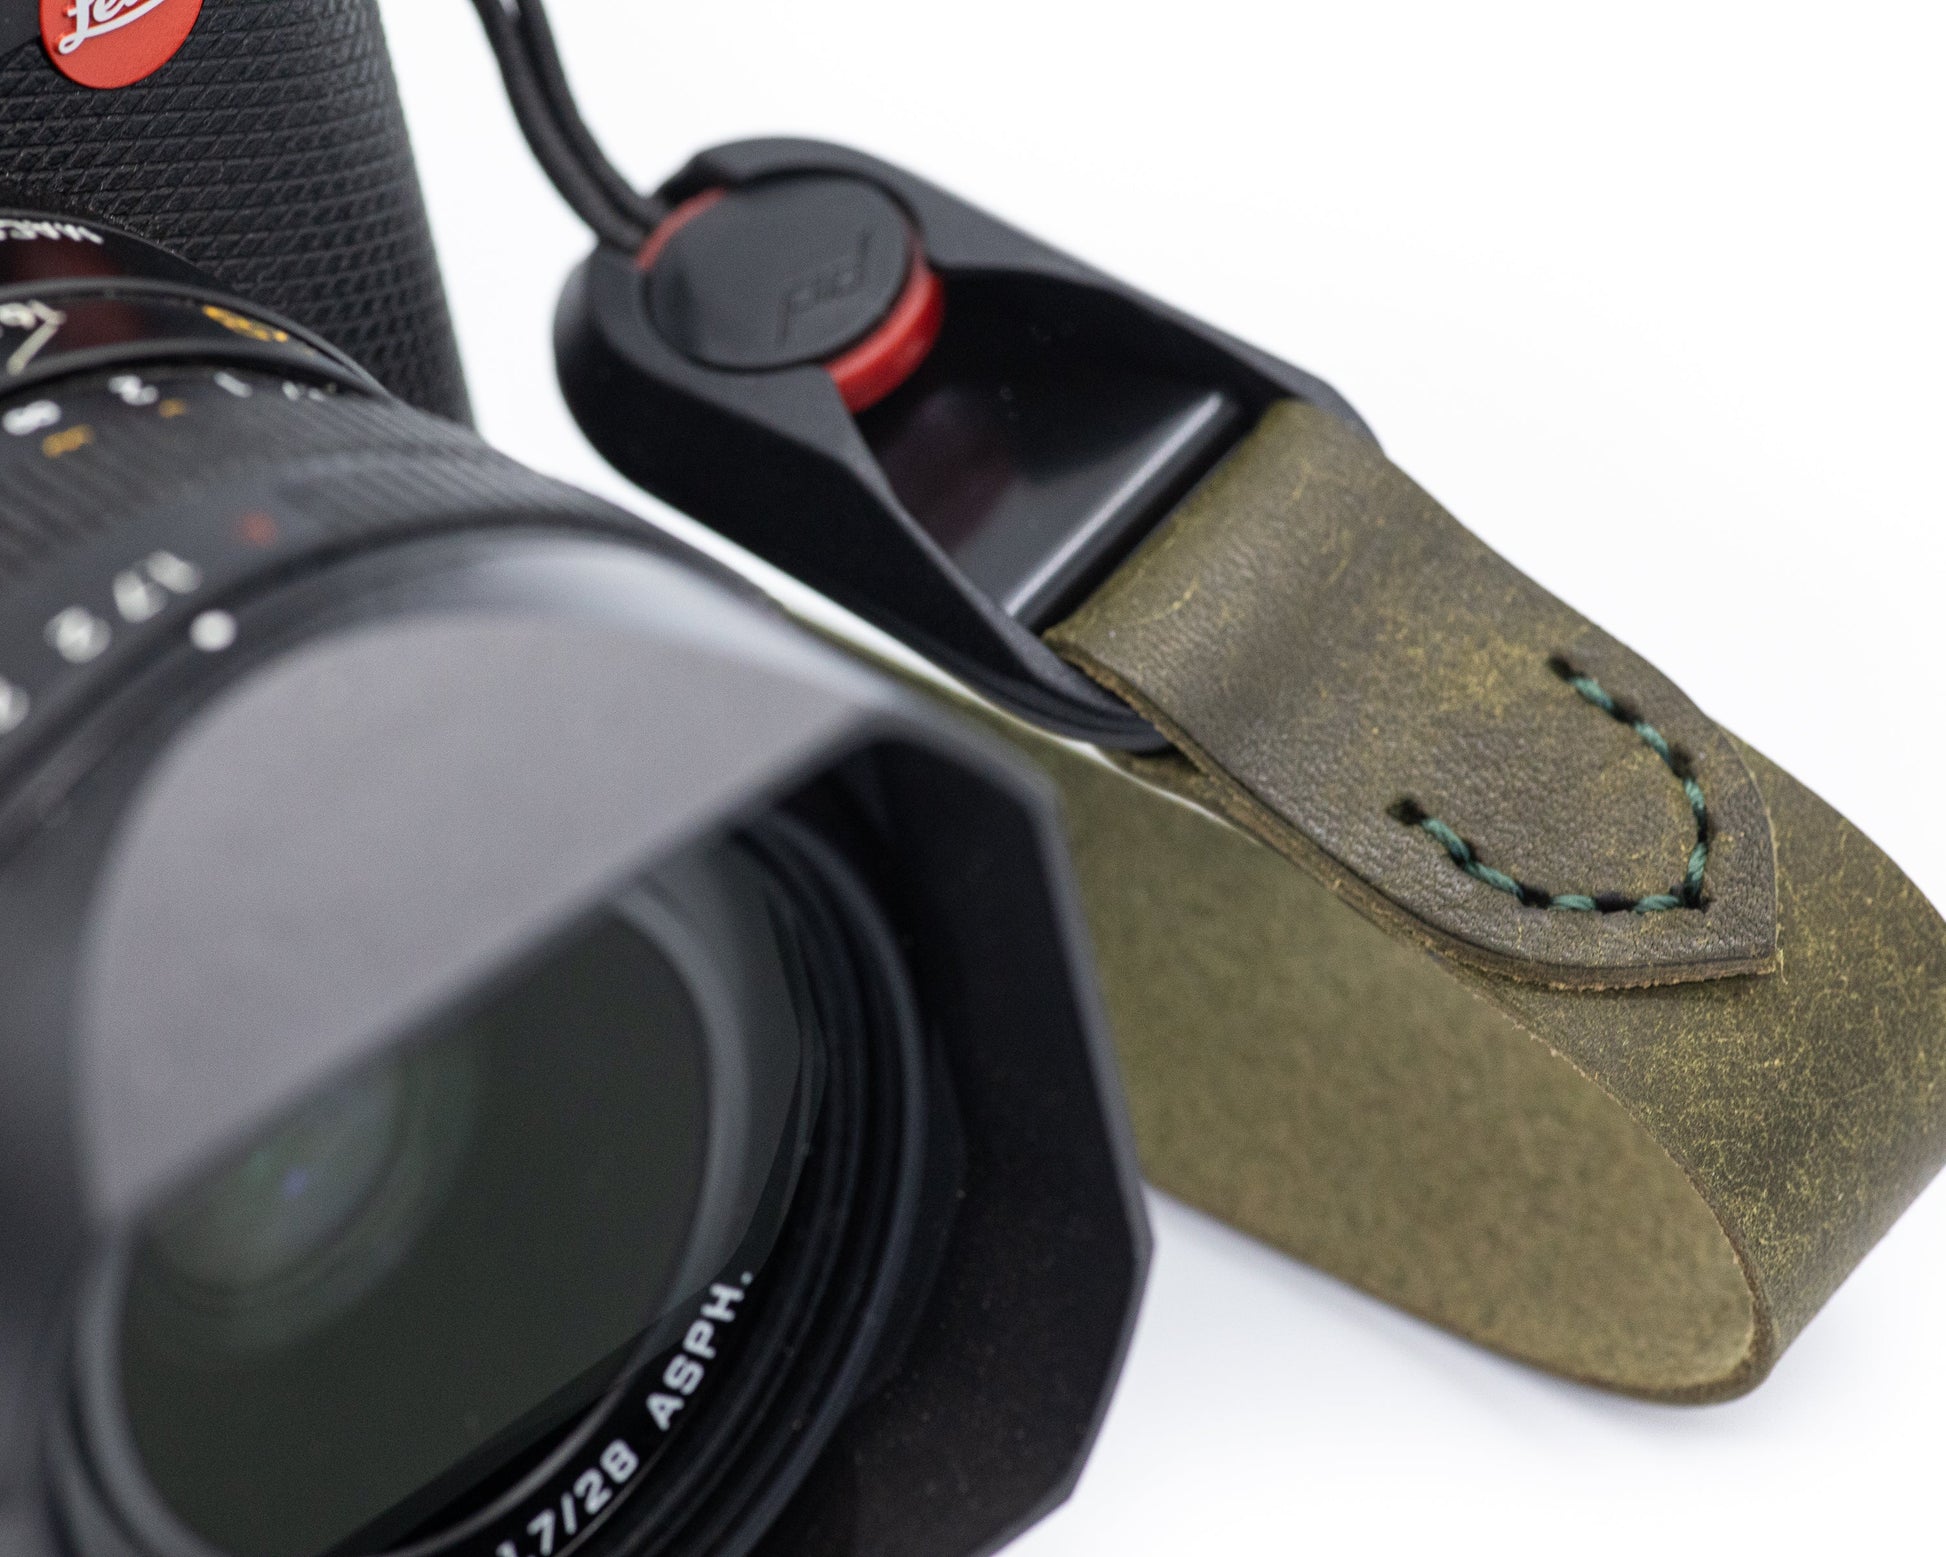 Dual leather camera strap with Peak Design anchor: Accessories Talk Forum:  Digital Photography Review